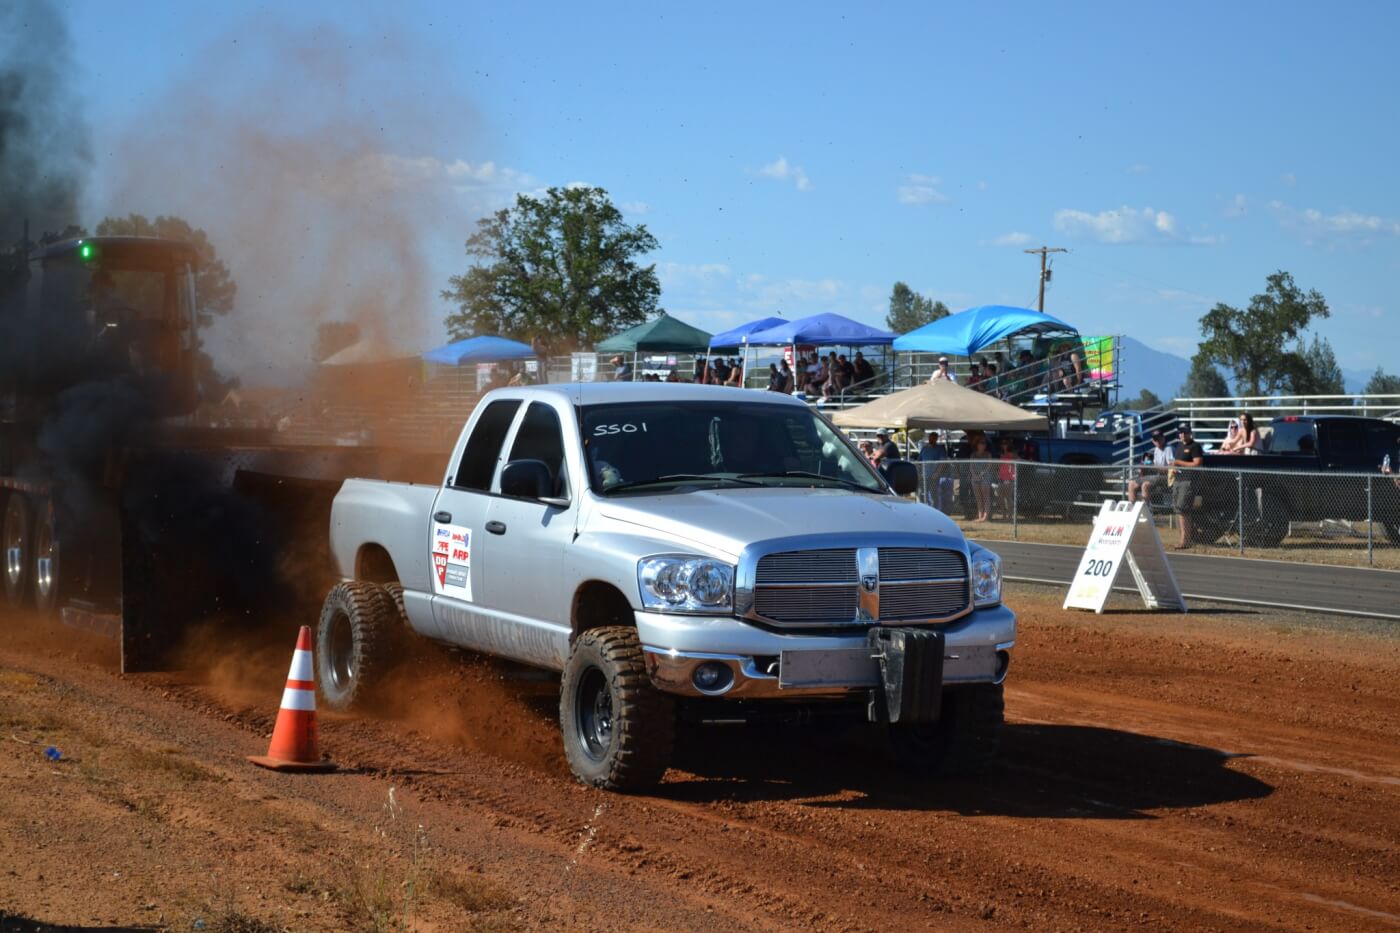 Perhaps the most impressive performance of the pull was put in by Les Szmidt, who used nearly 1,000 horsepower on a 2.6-inch charger to motivate his Dodge to a 338-foot pull and past the rest of the field by a good margin.